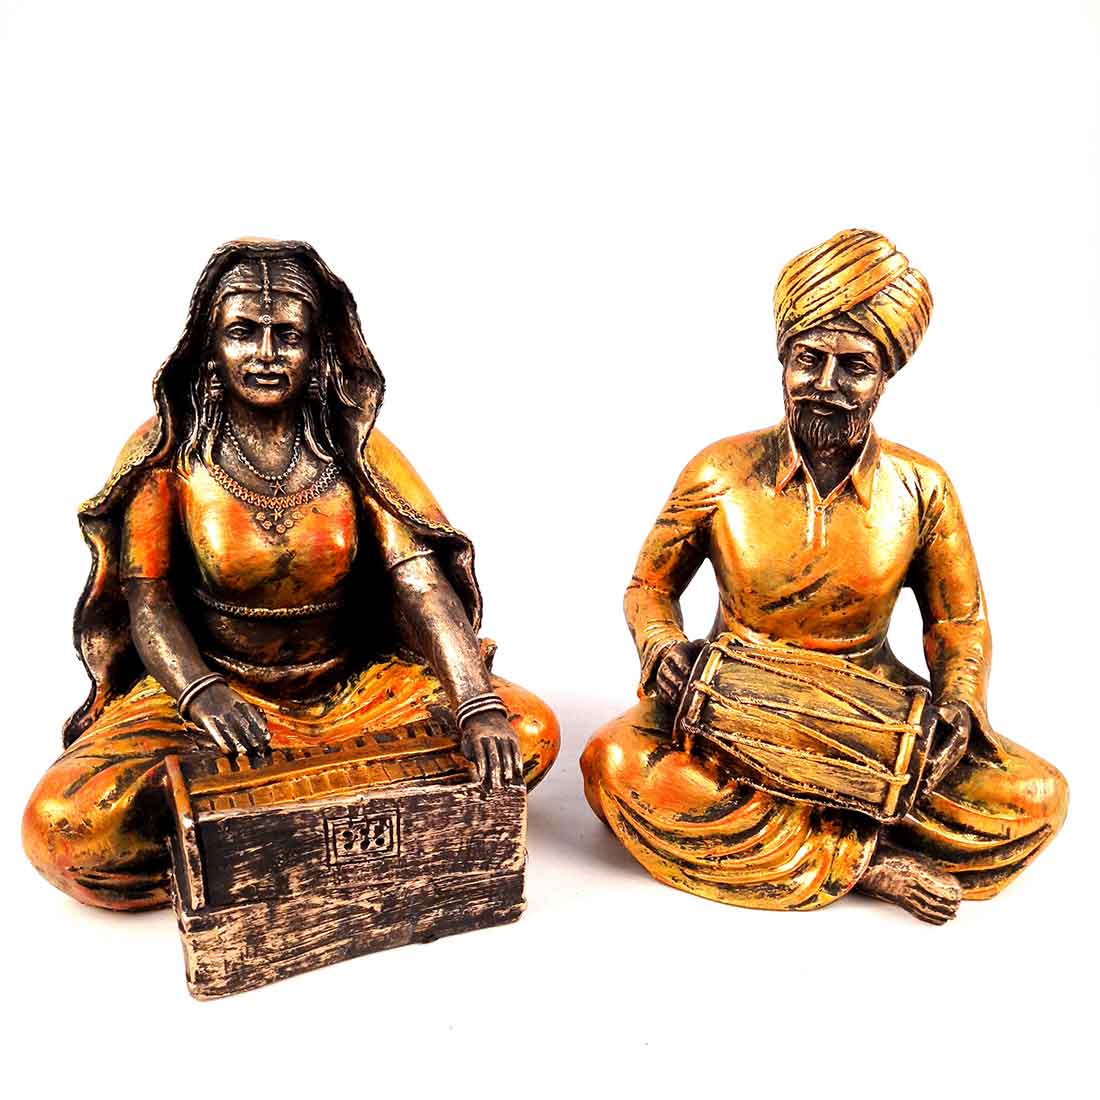 Couple Musician Showpiece - Human Figurine - For Living Room & Gifts - 11 Inch - Set of 2 - ApkaMart